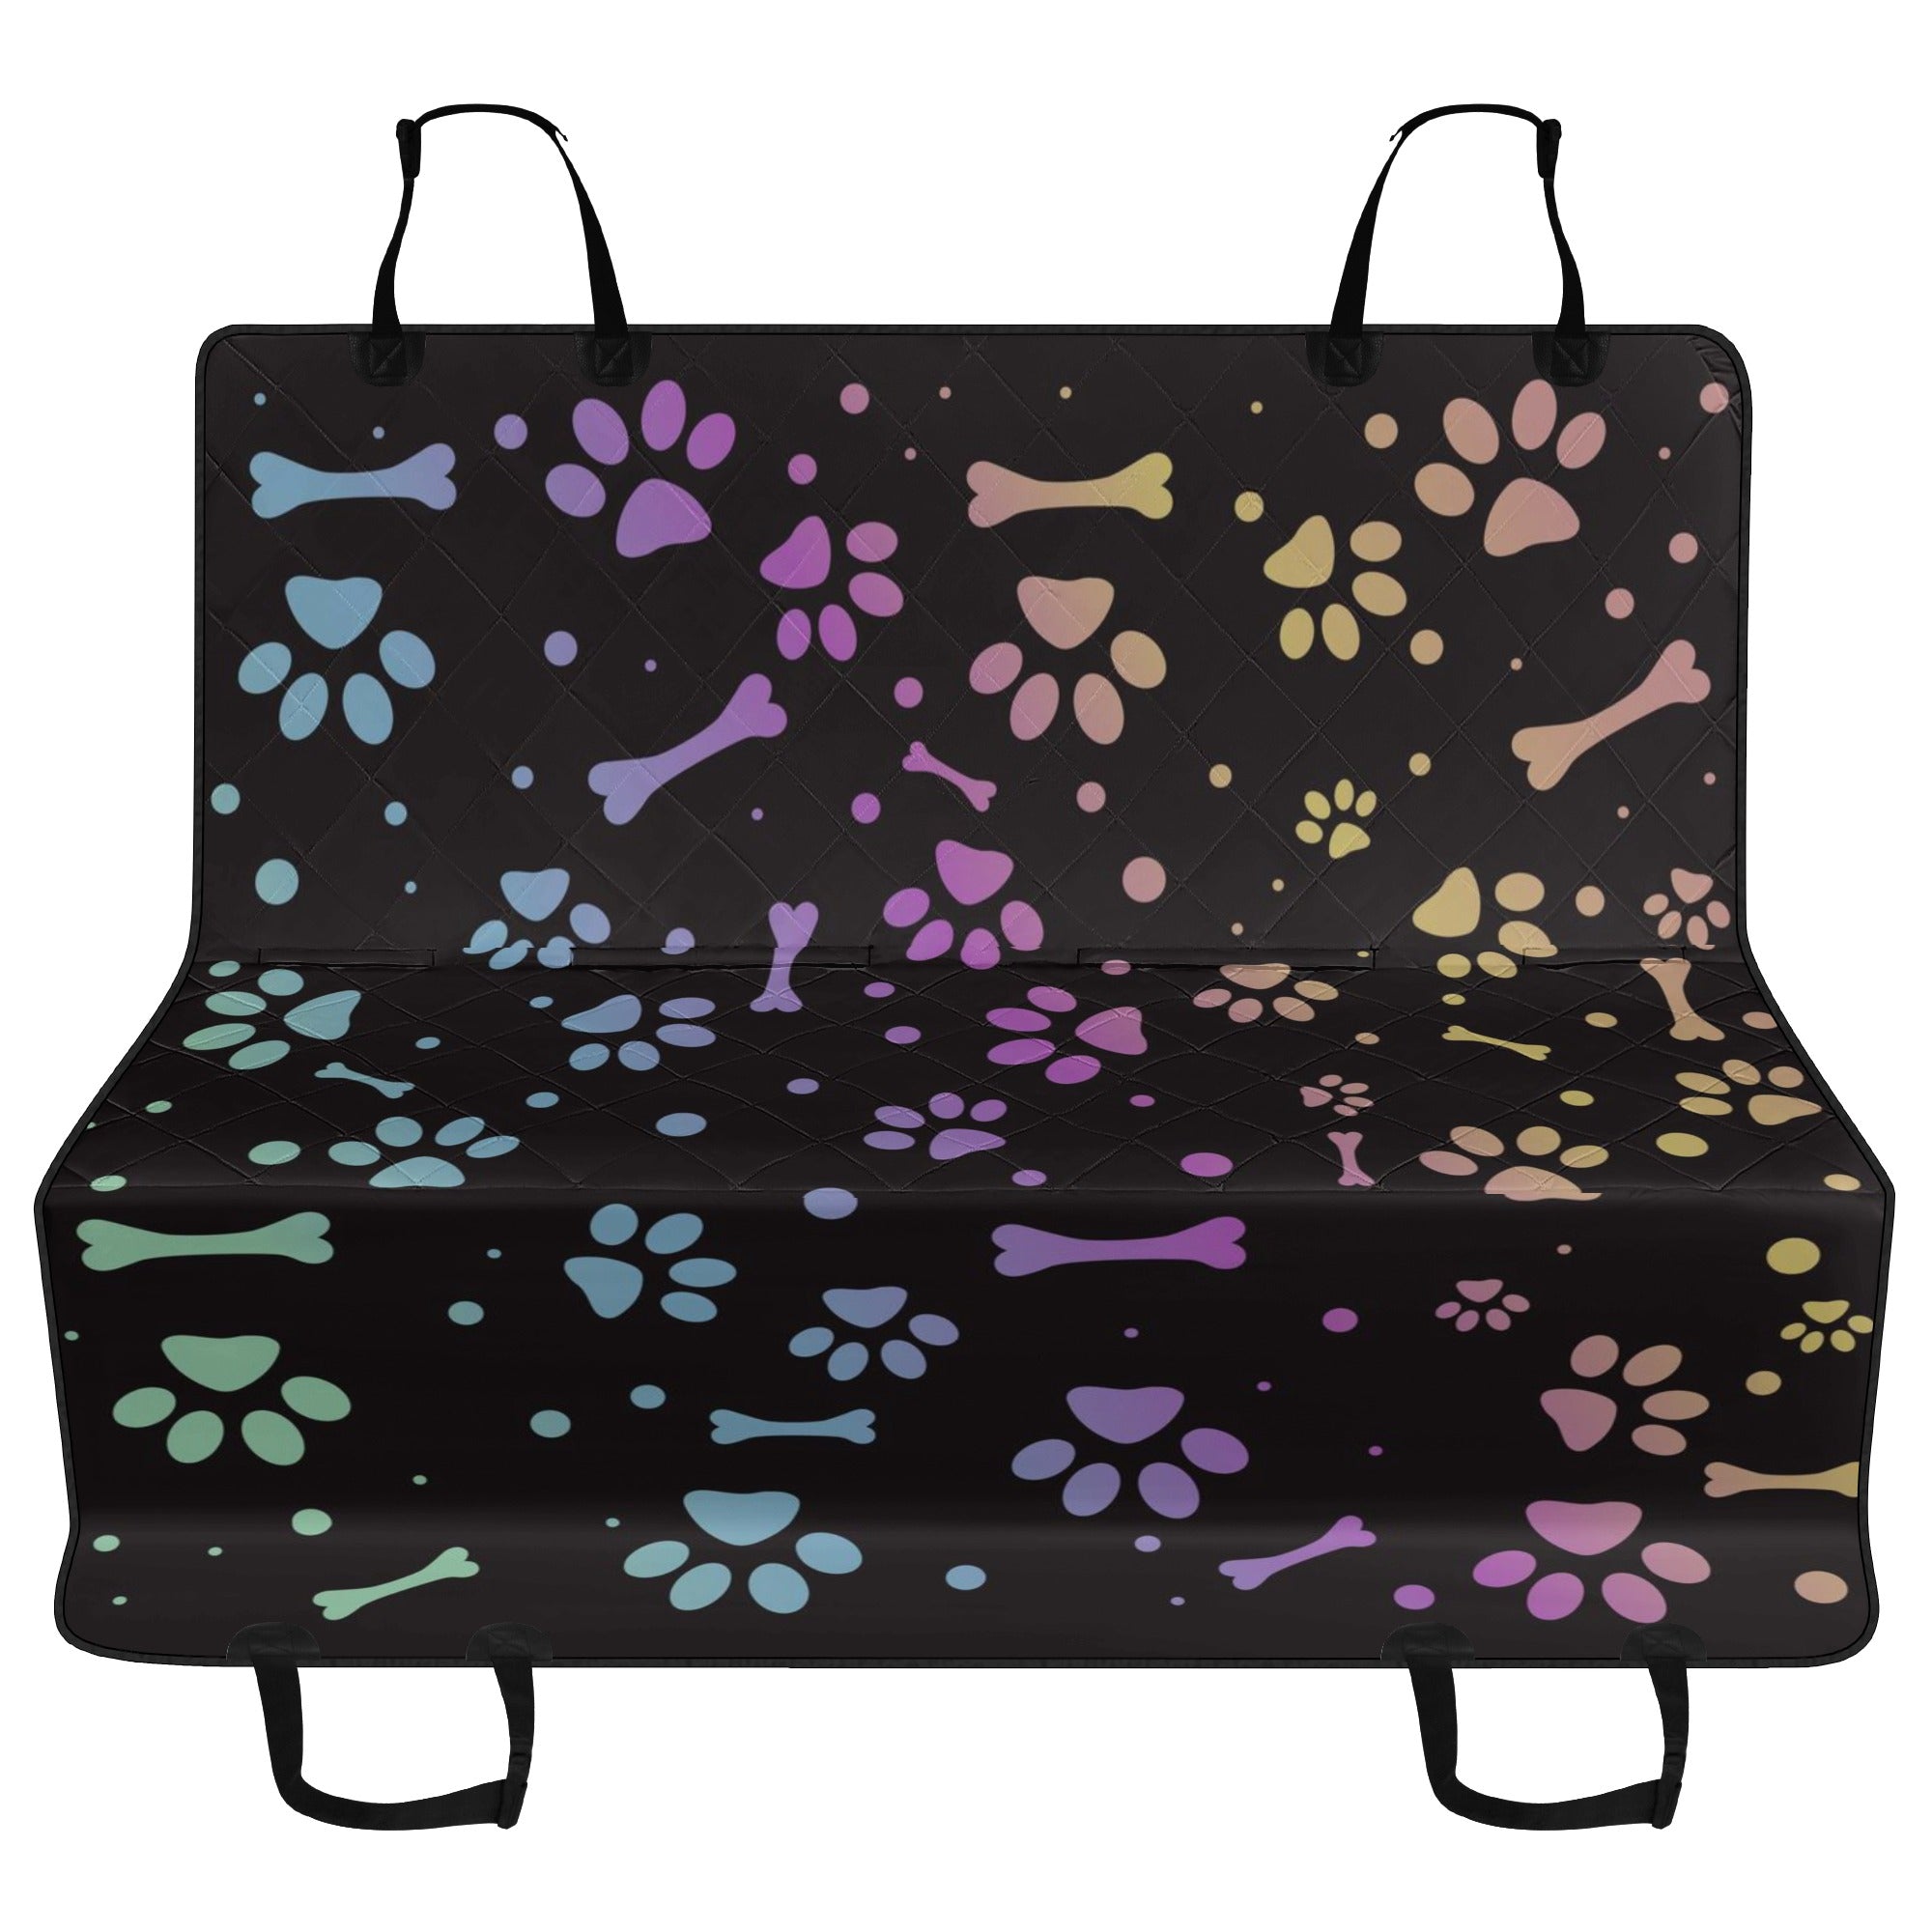 Travel in style with your furry best friend with our Colorful Car Dog Seat Covers! These seat covers will keep the backseat clean and dog hair-free, so you won't have any doggone worries as you hit the road.